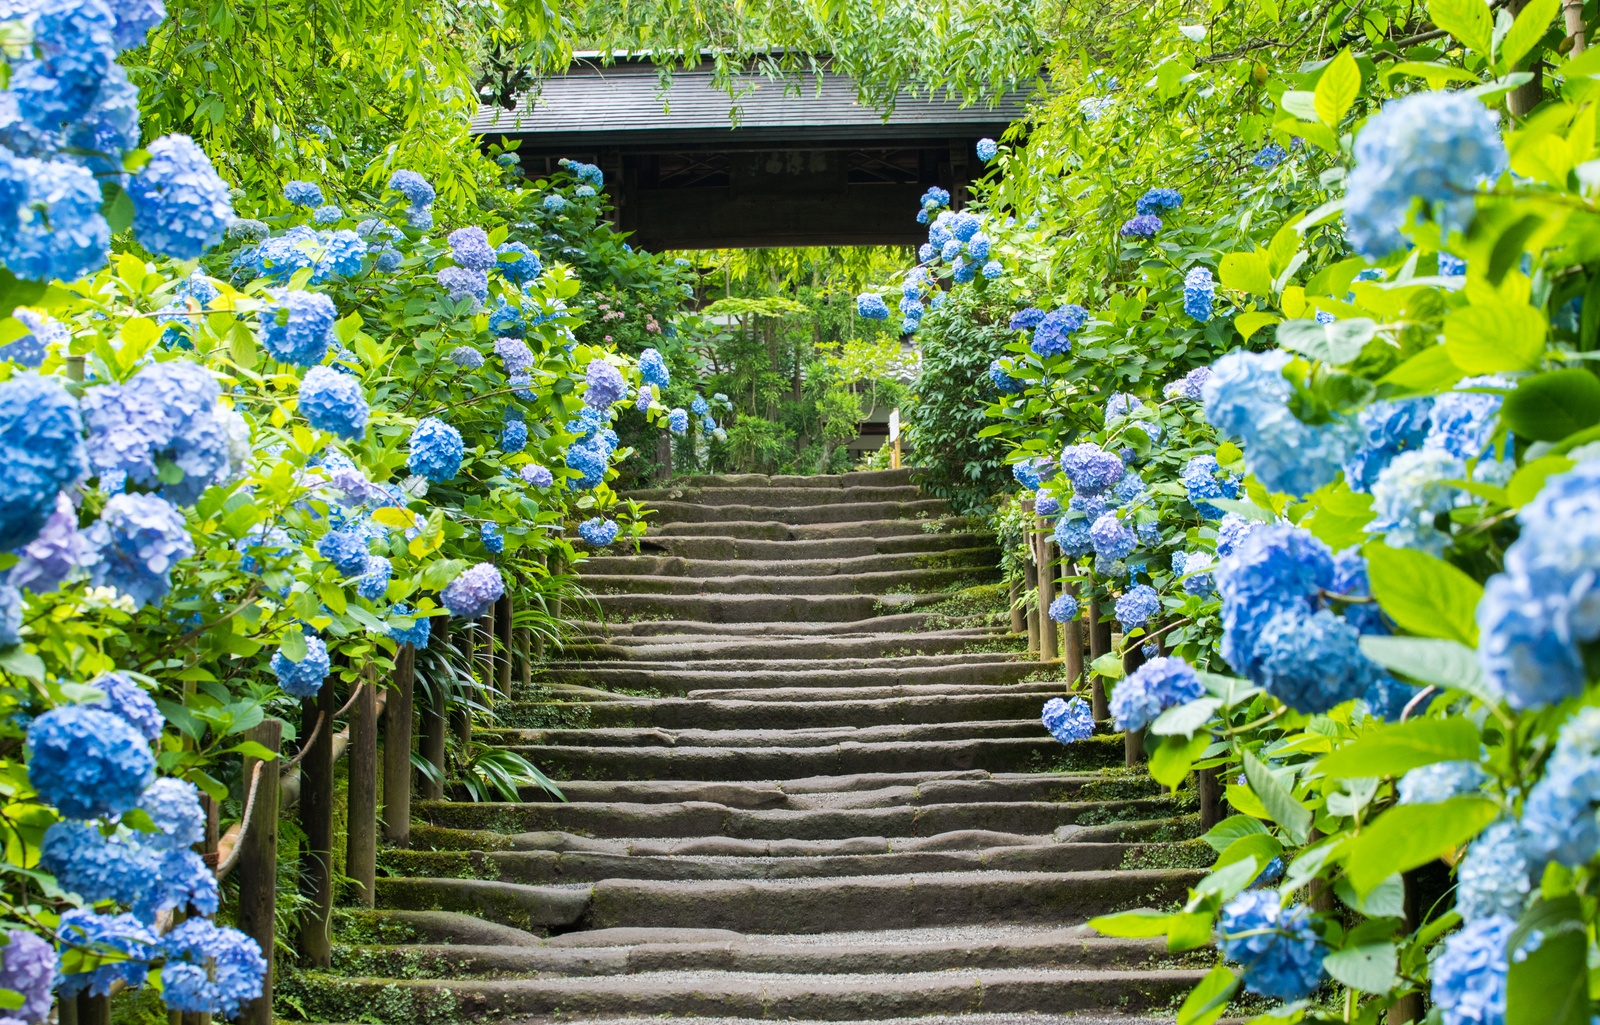 Feel the Flower Power at Meigetsu-in Temple